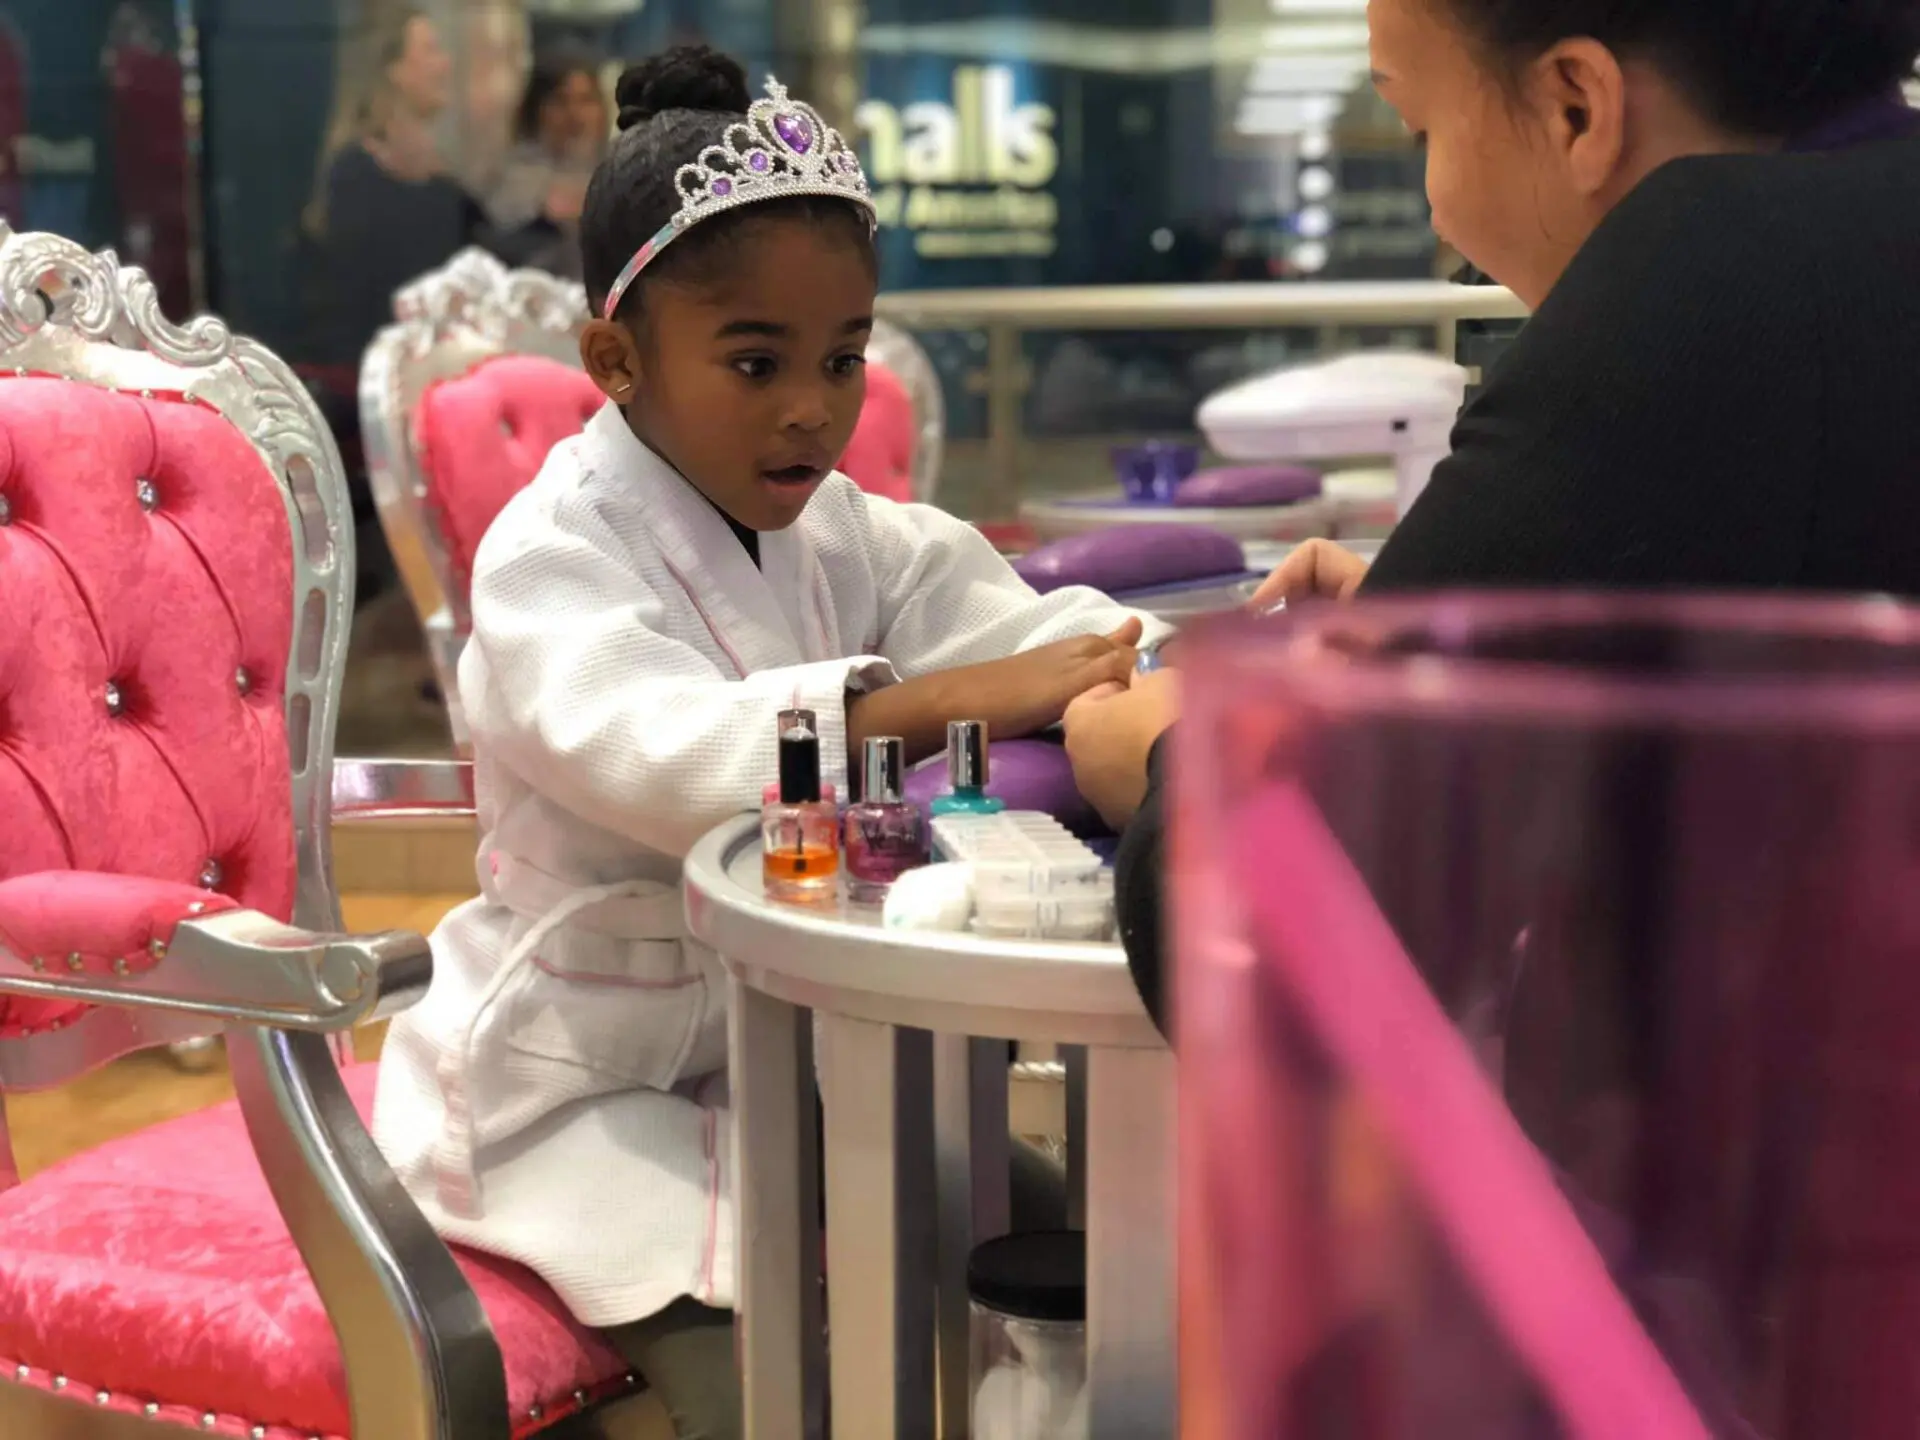 A young girl in a tiara sits at a table with her mother.